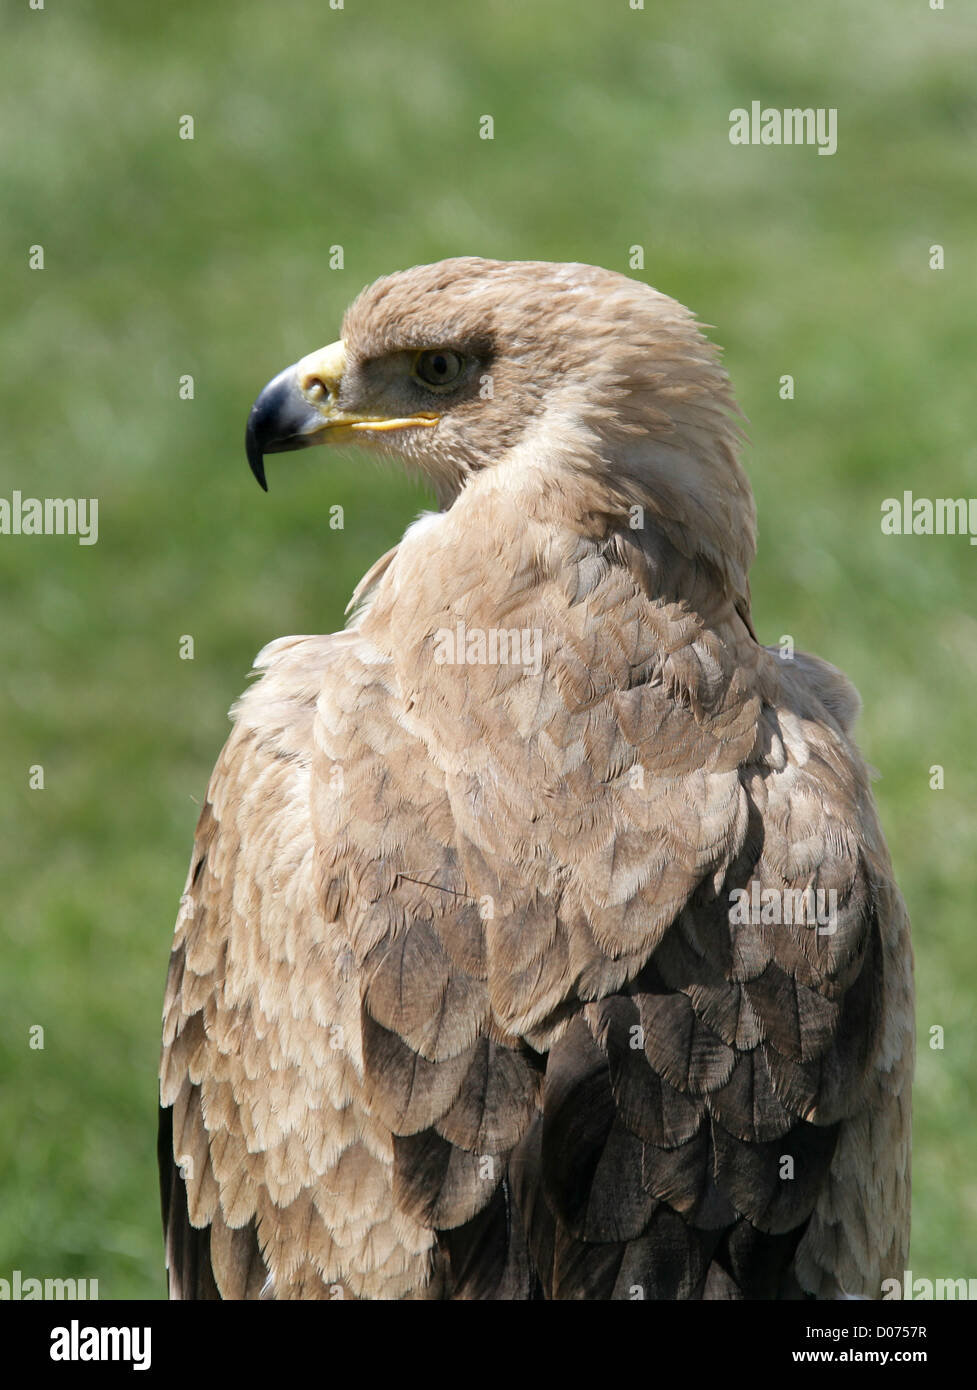 Tawny Eagle, Aquila rapax, Accipitridae. Africa and South West Asia. Stock Photo